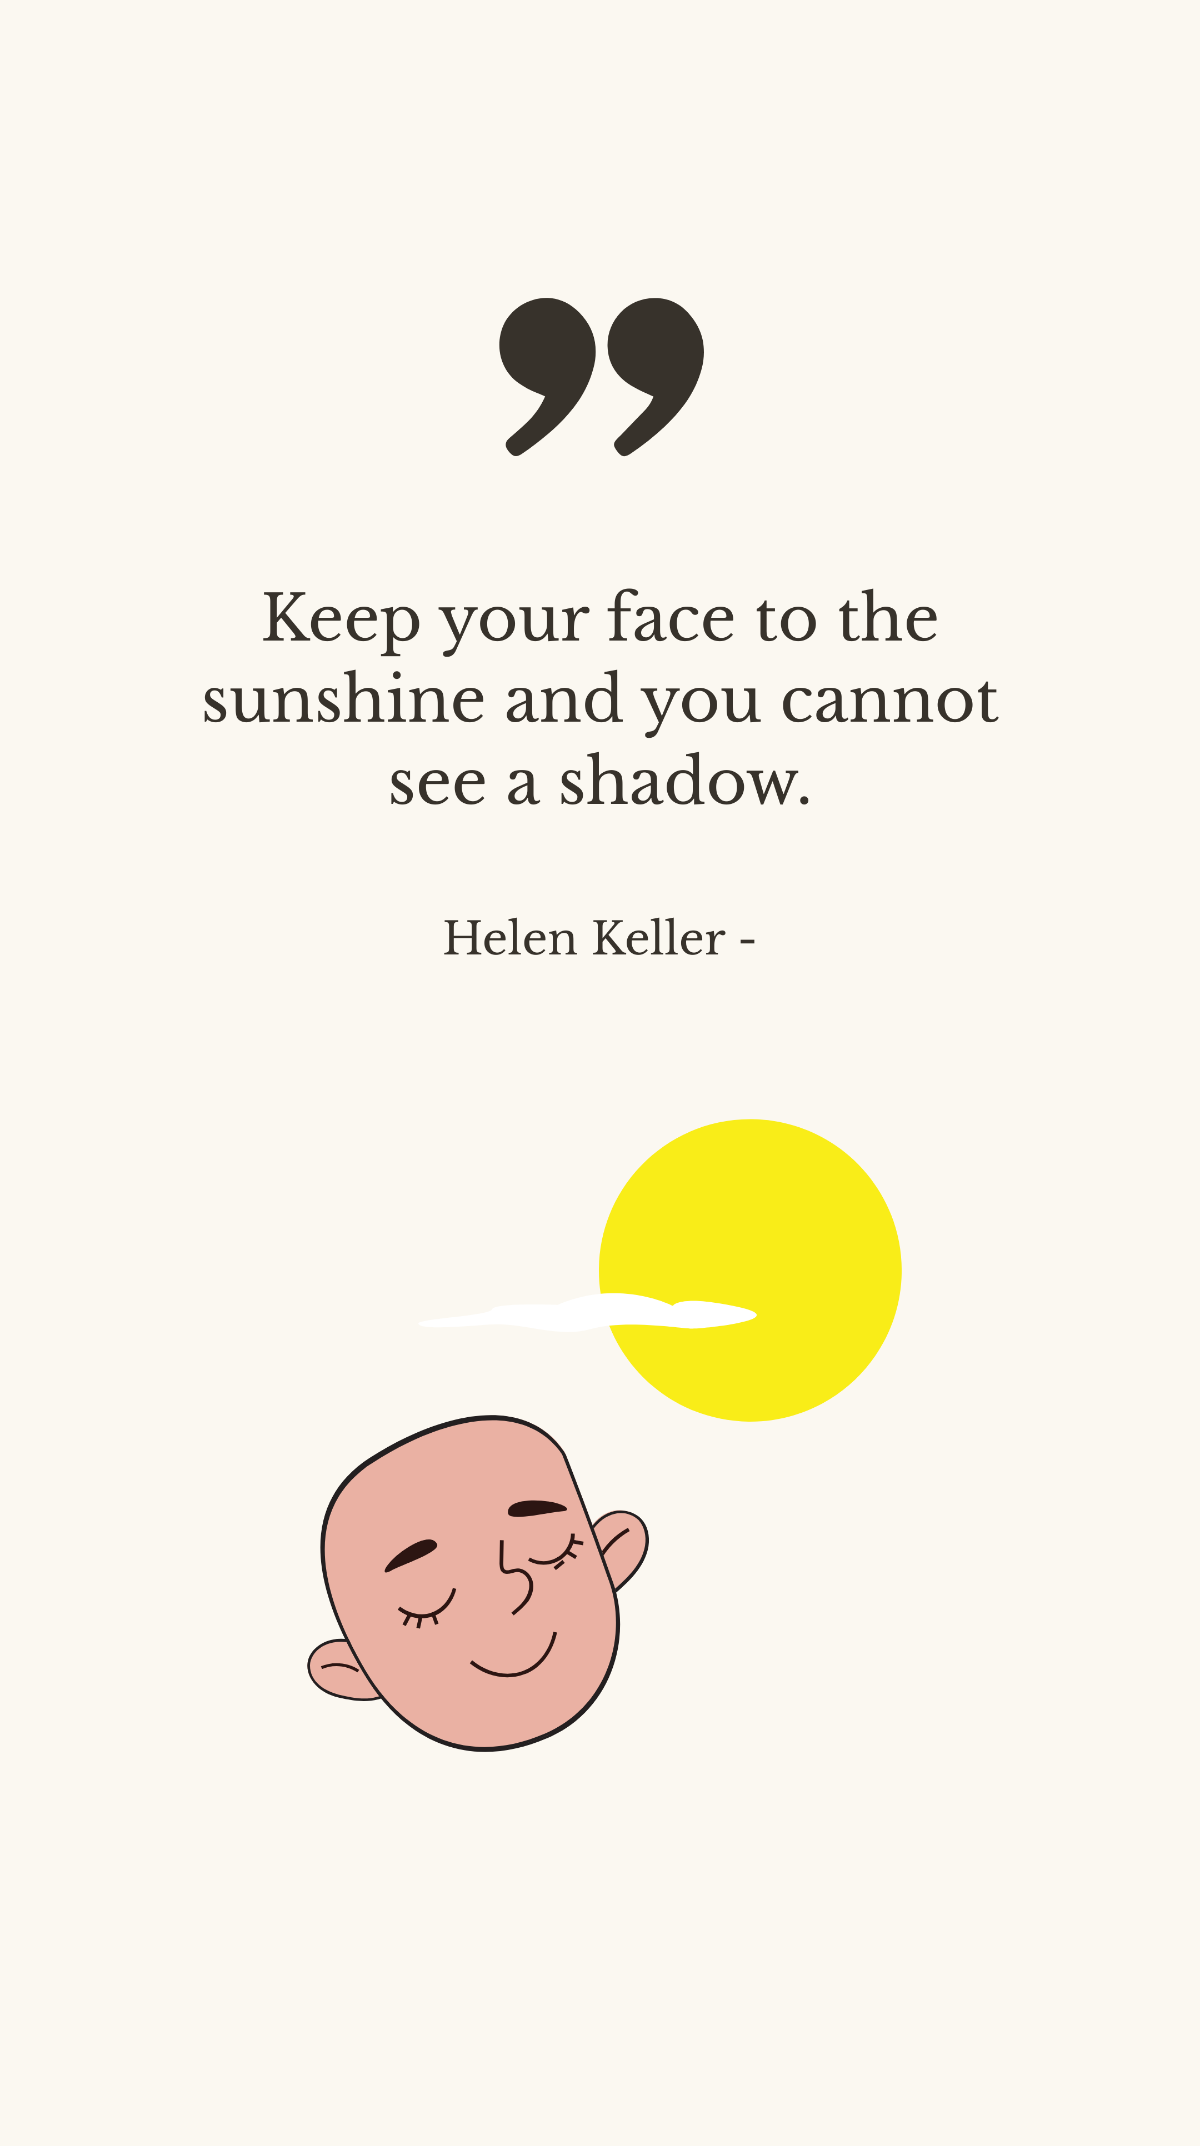 Helen Keller - Keep your face to the sunshine and you cannot see a shadow. Template